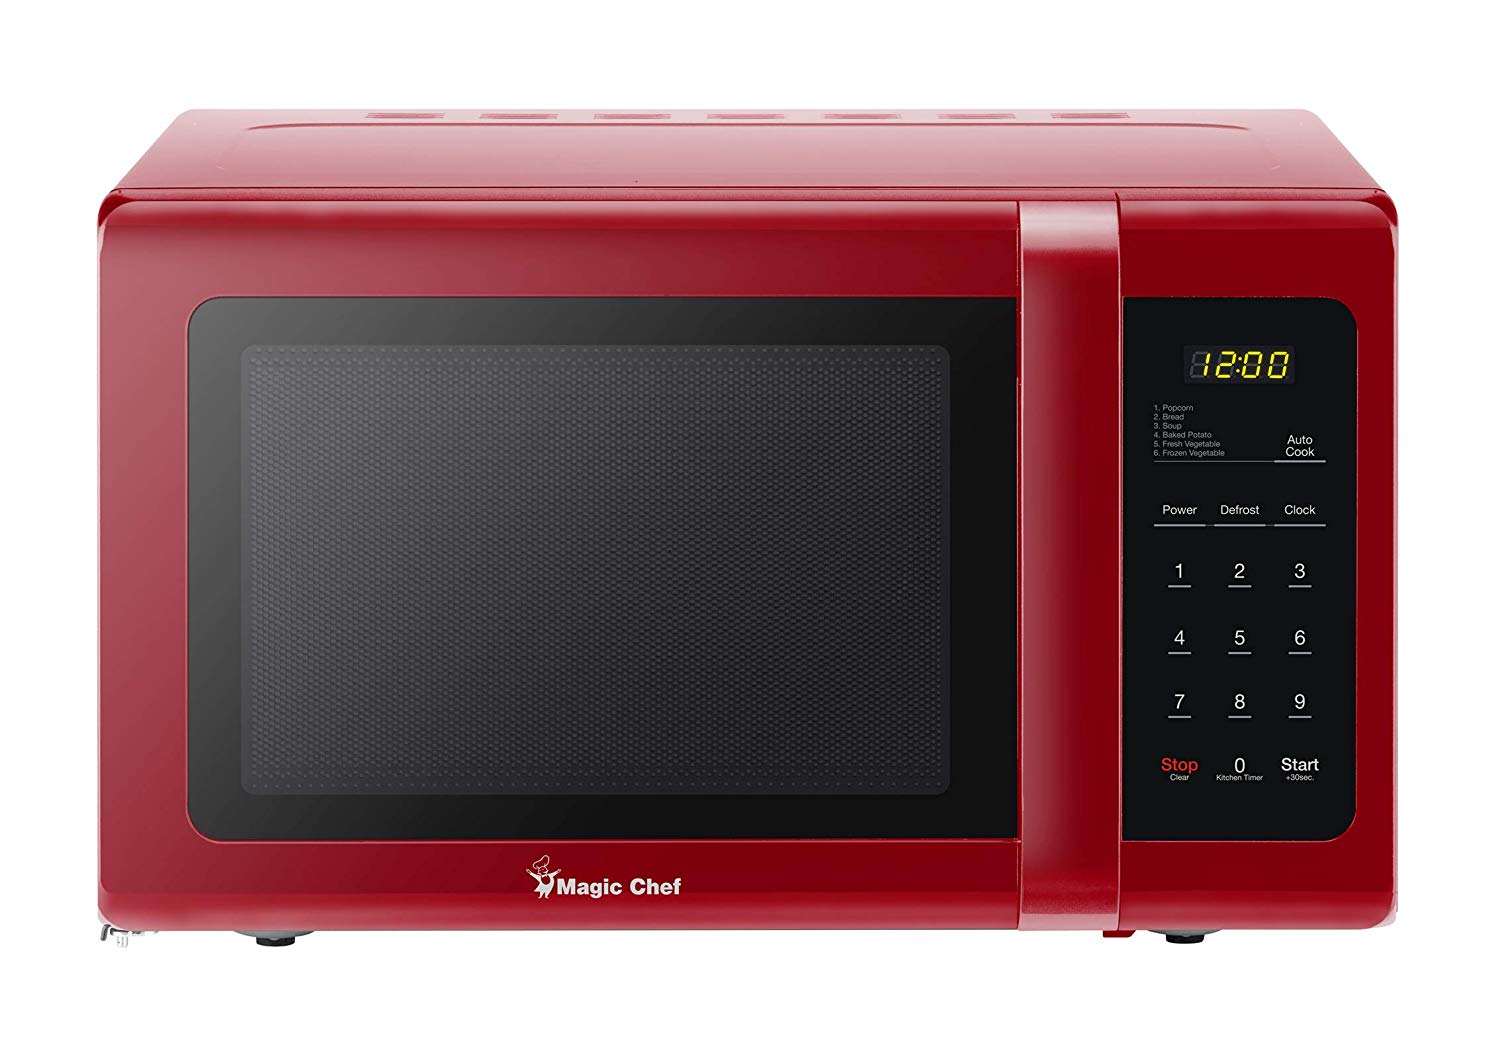 Magic Chef Mcd993r 0 9 Cubic Feet Countertop Microwave Red